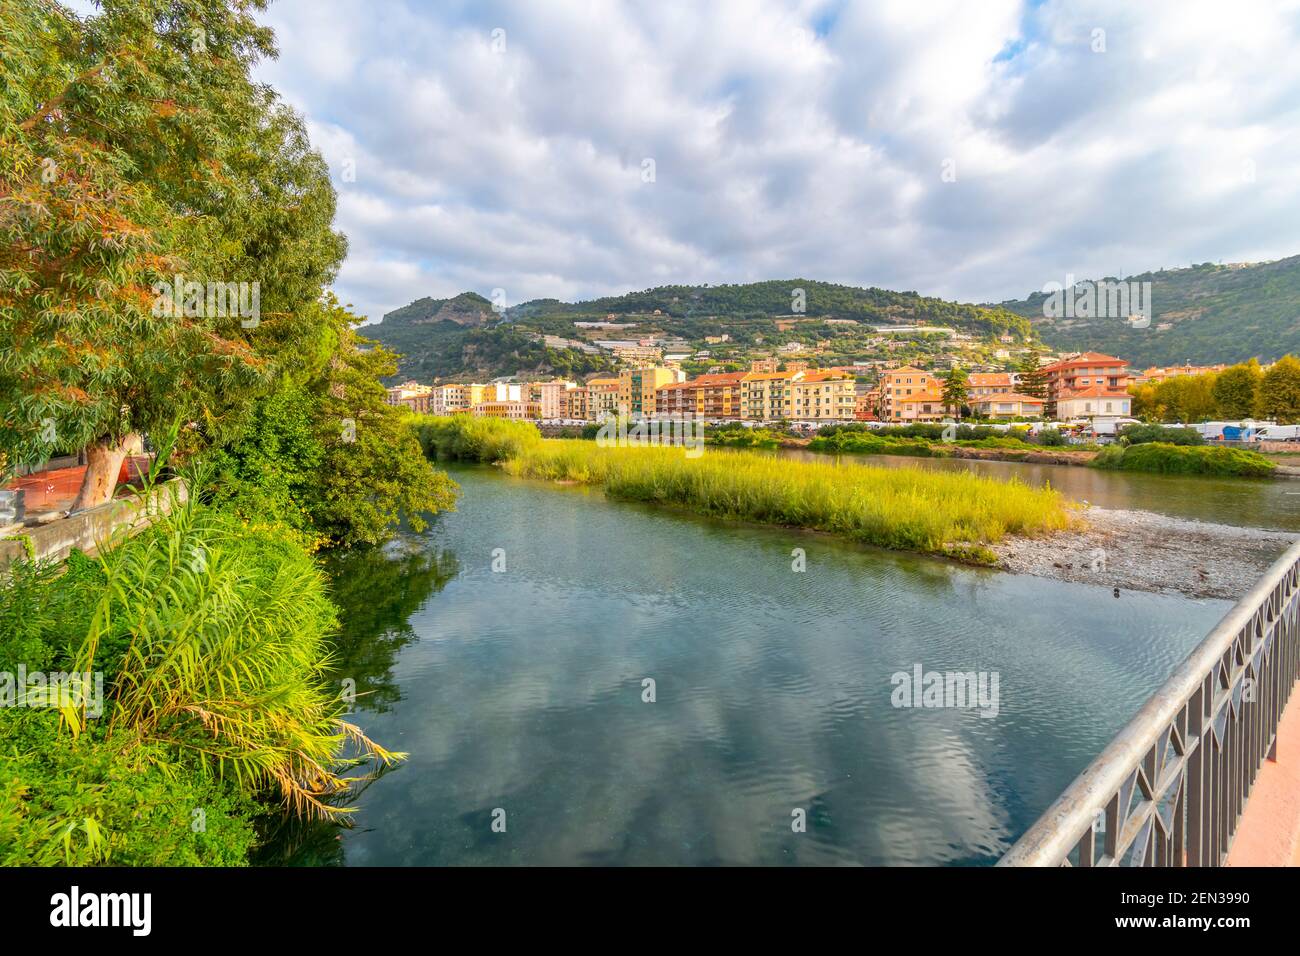 View from the bridge across the river Roya of the village of Ventimiglia, Italy, and inland to the mountains Stock Photo